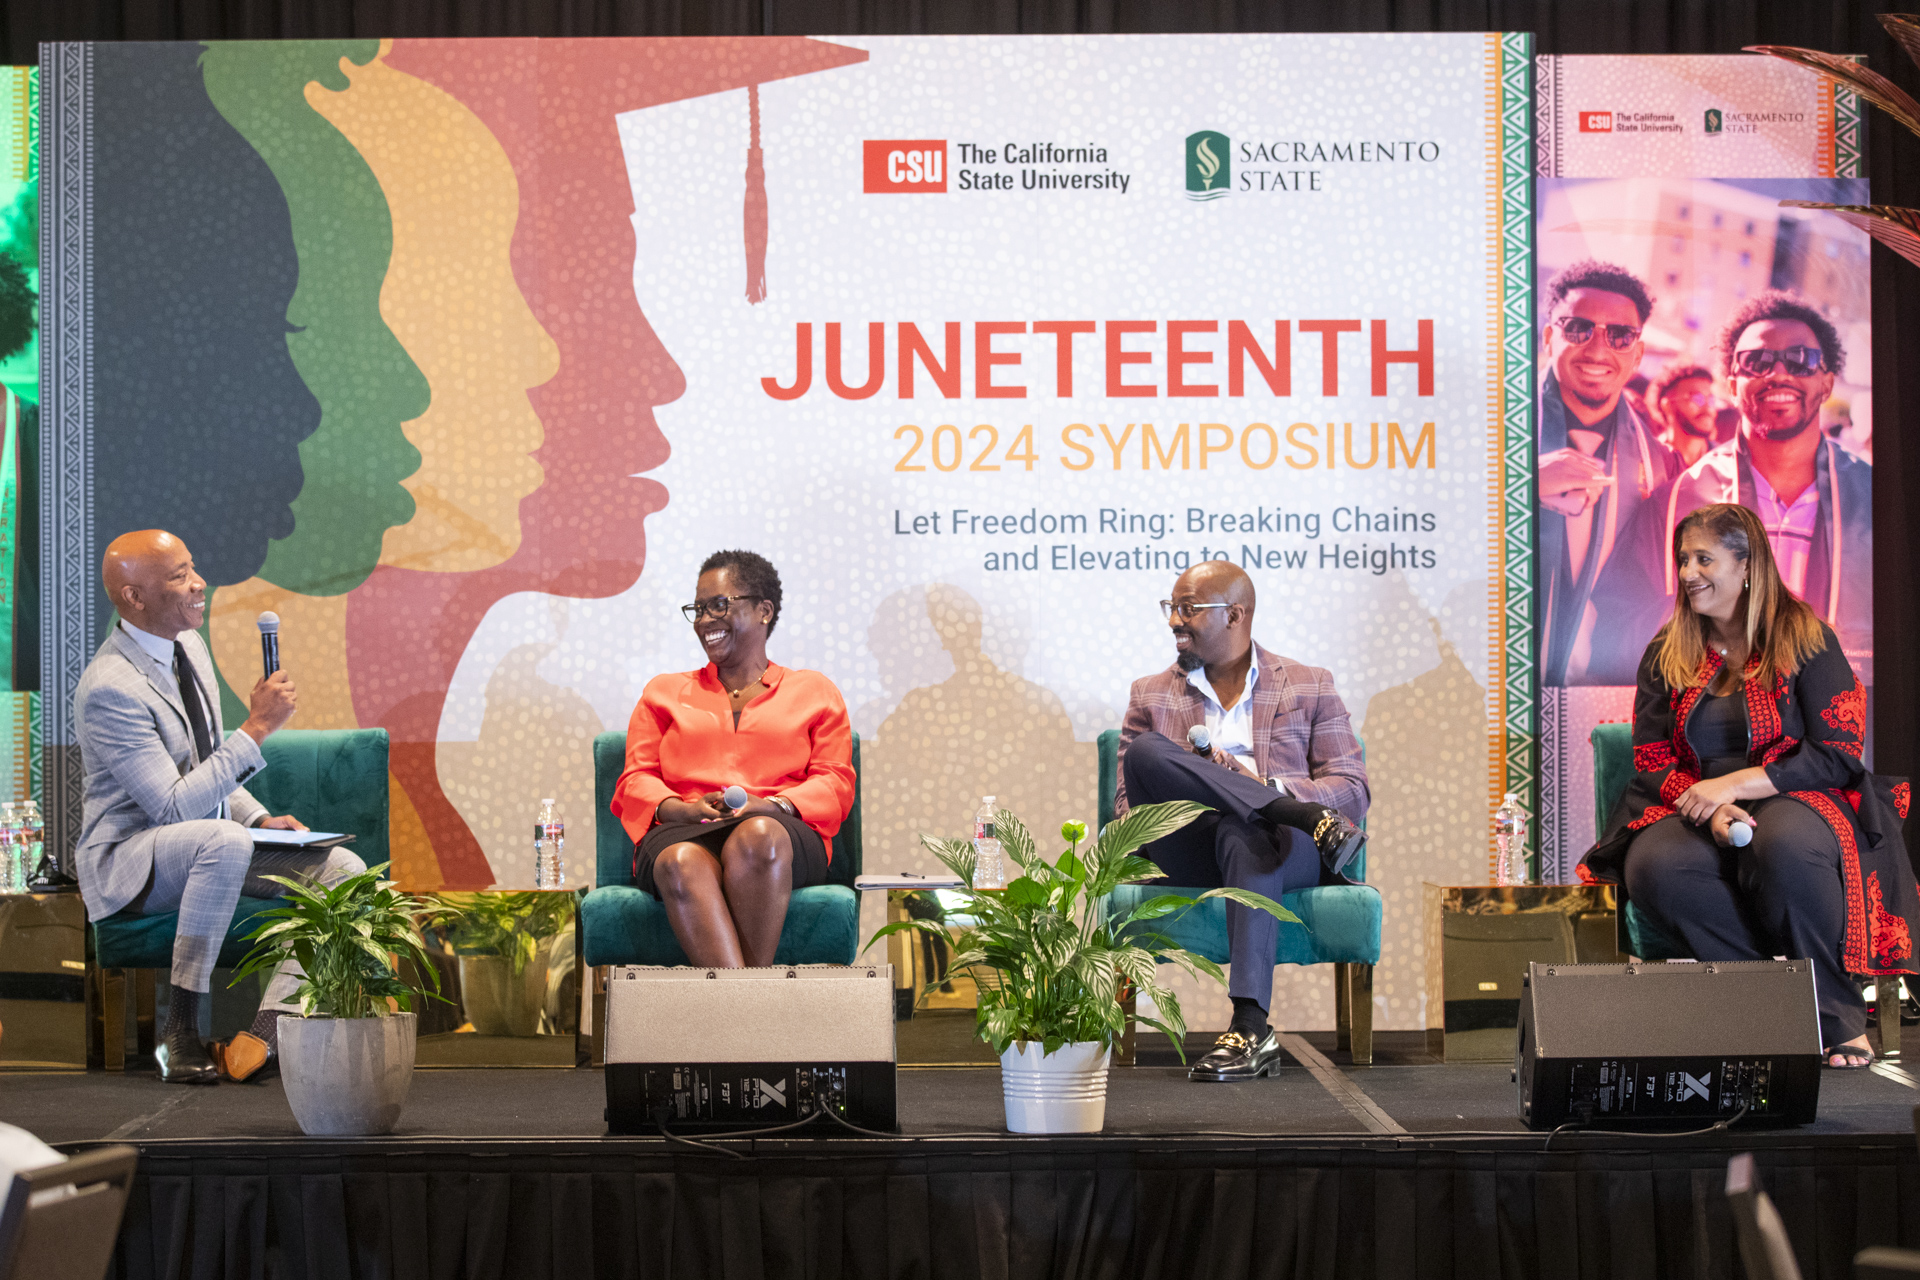 Members of the Juneteenth symposium during a panel discussion.